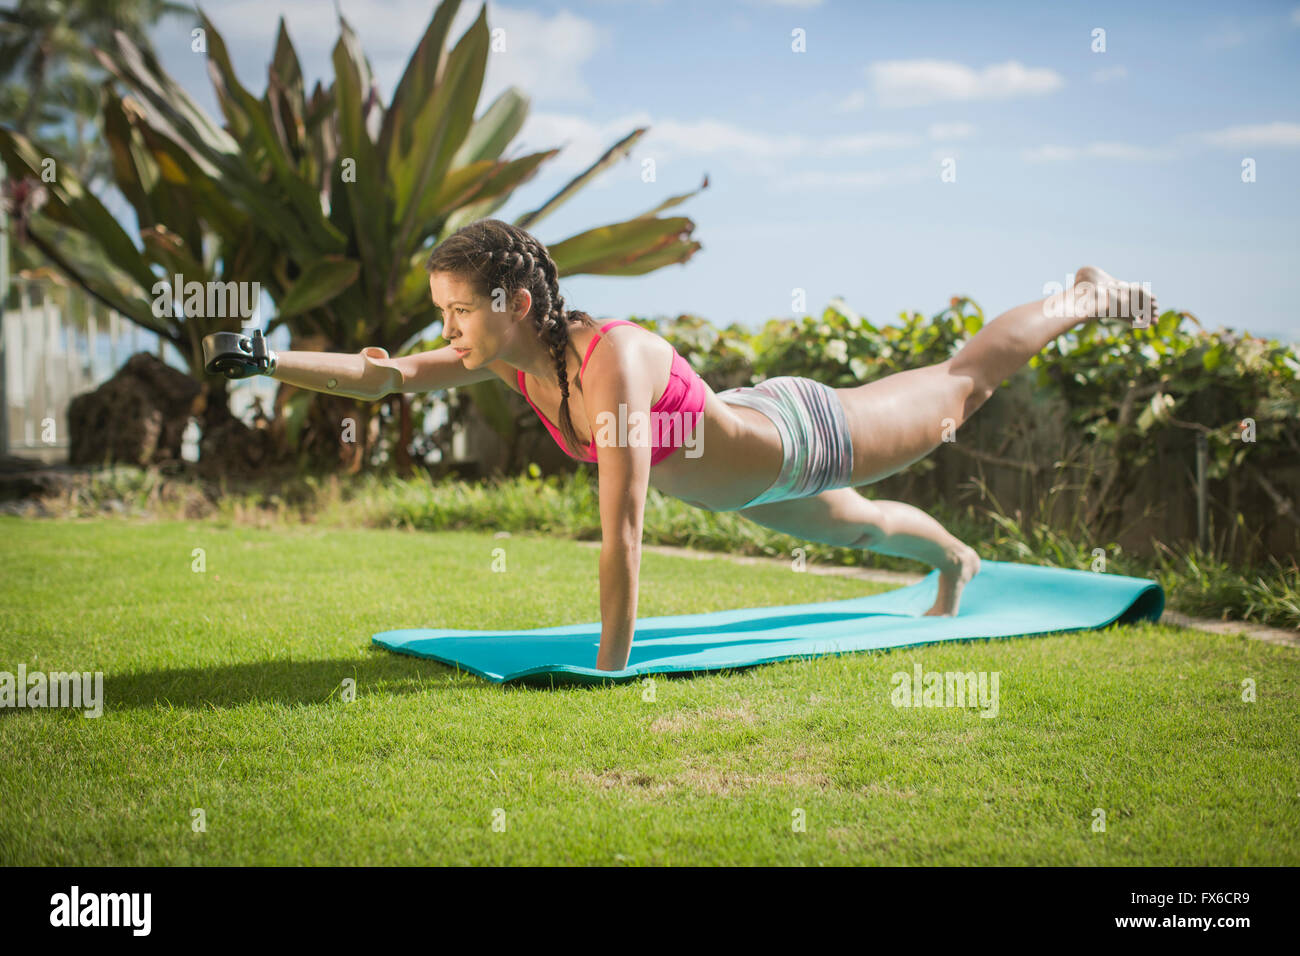 Mixed race amputee practicing yoga in grass Stock Photo